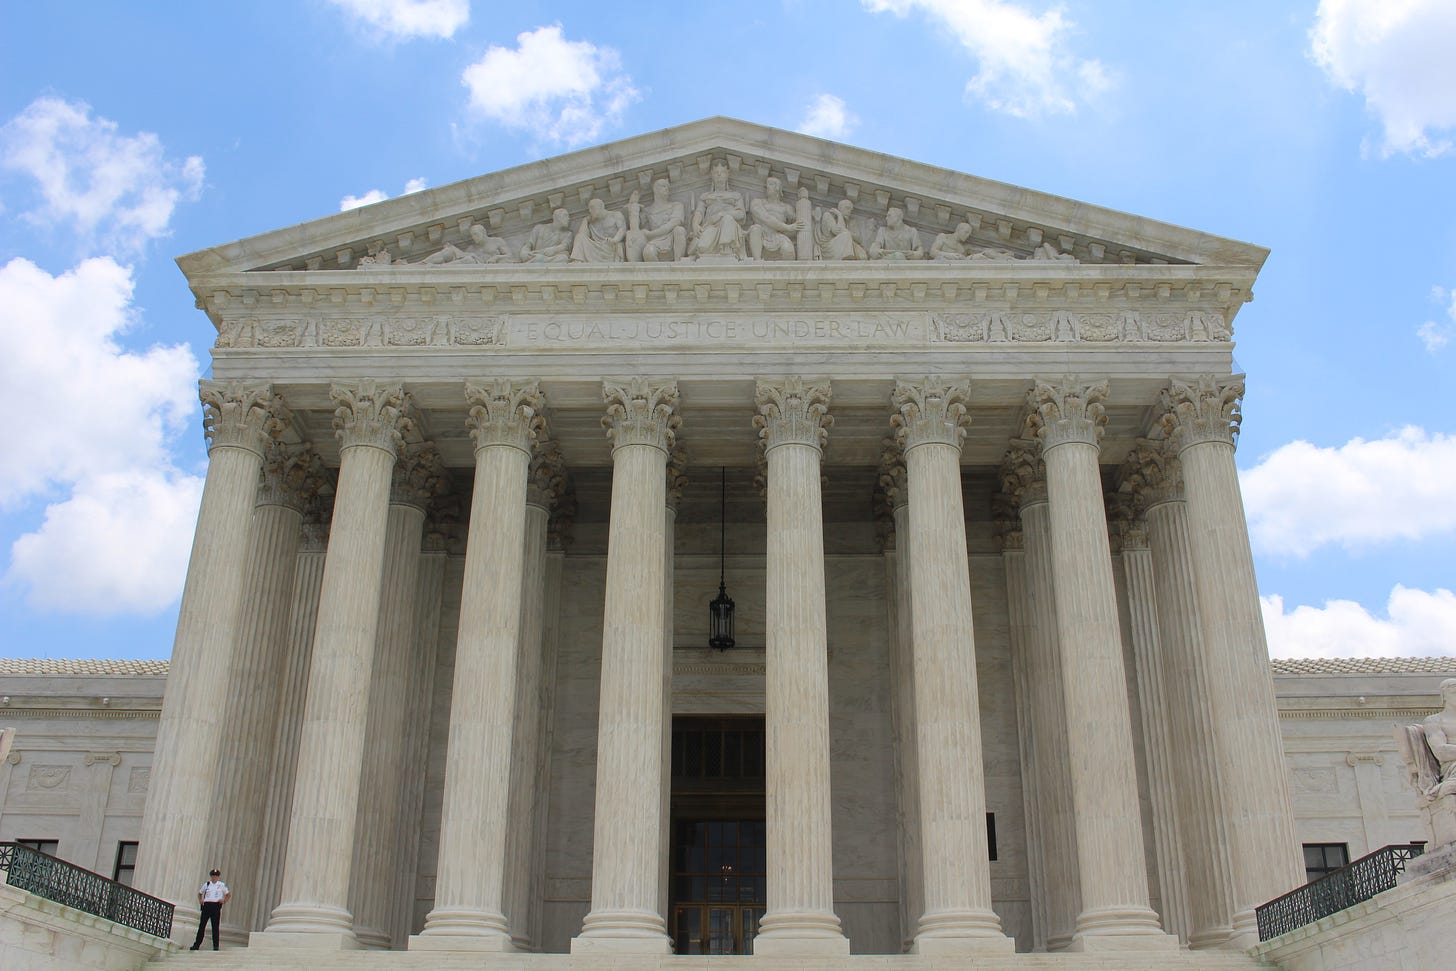 A picture of the U.S. Supreme Court building.